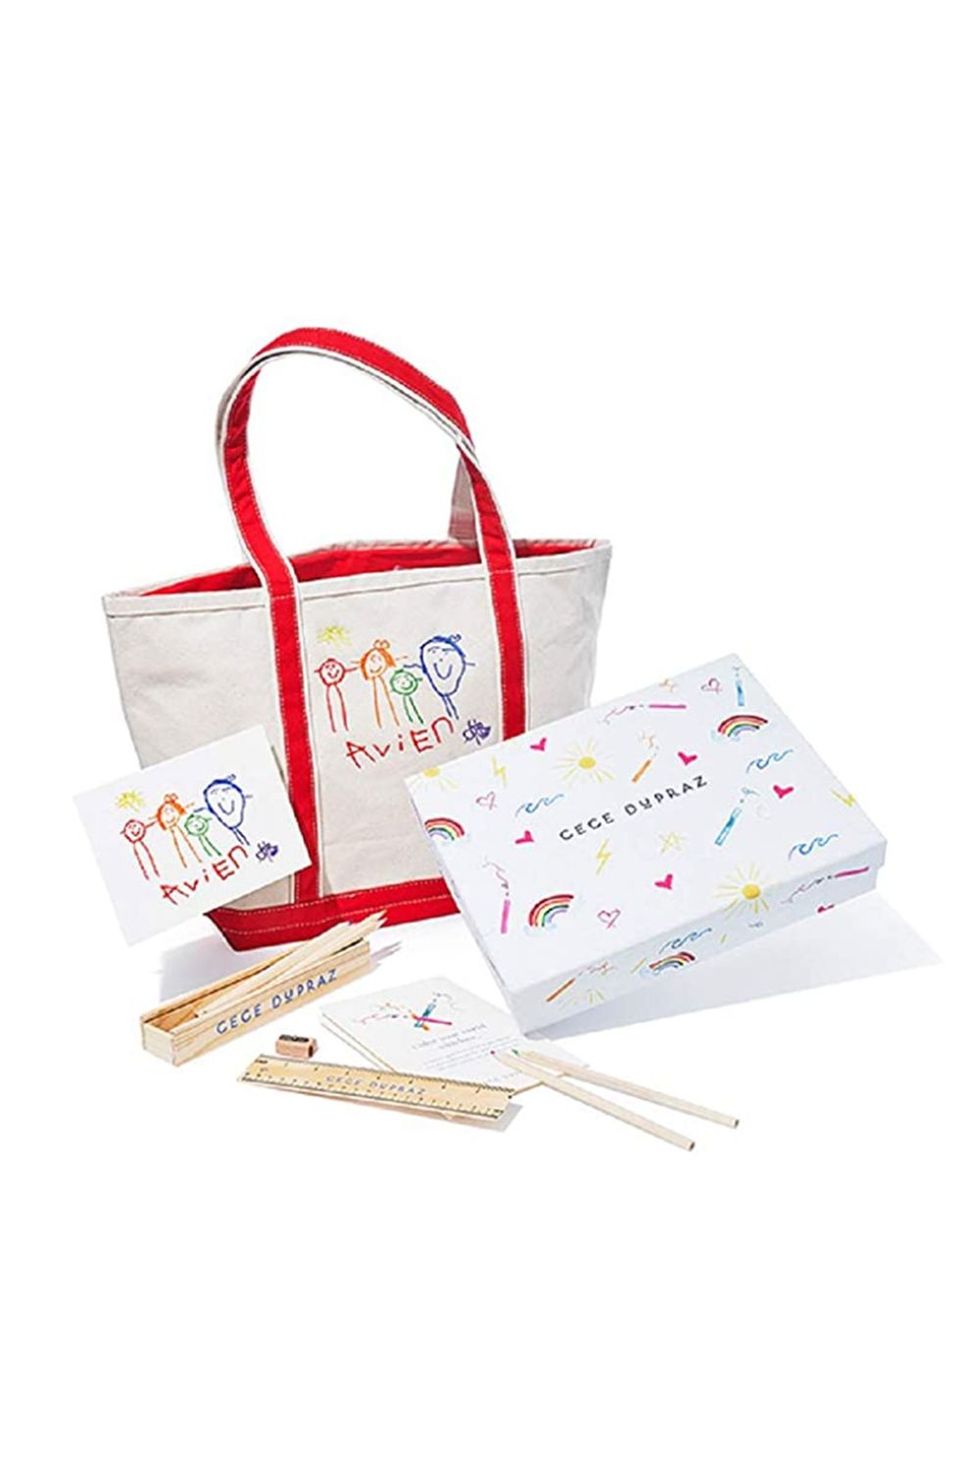 Draw Your Own Tote Bag Kit